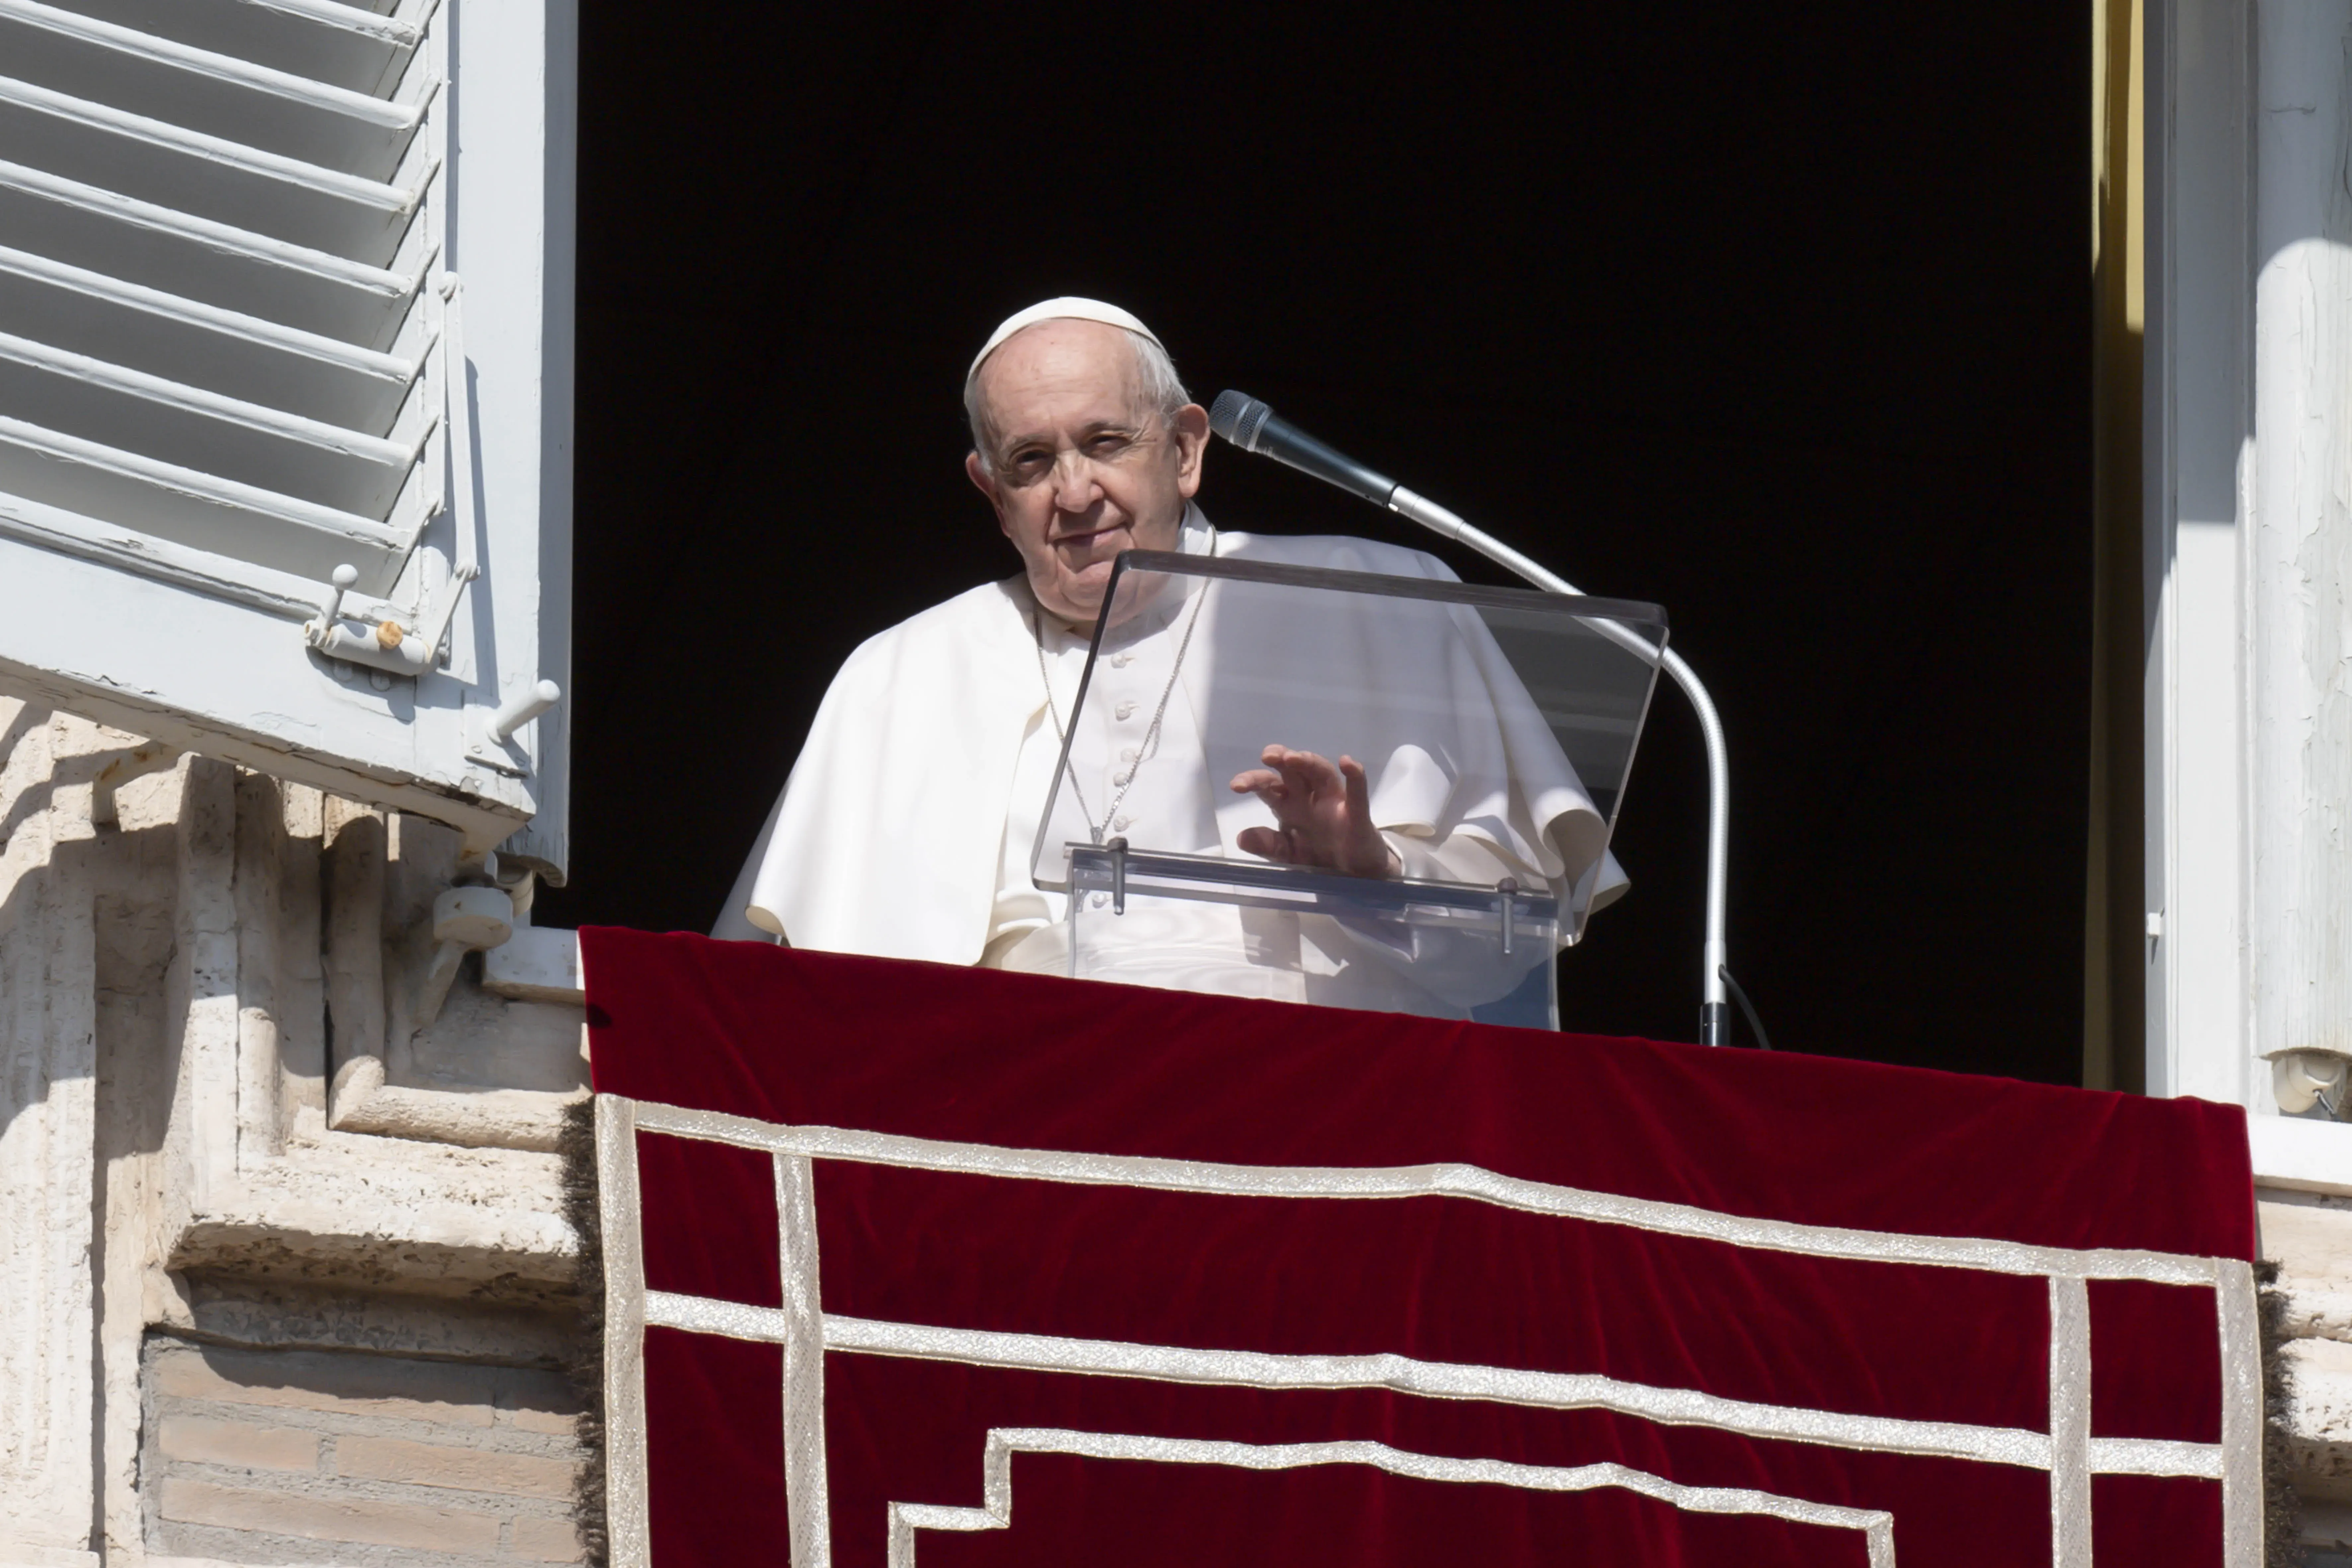 Pope Francis delivers his weekly Angelus message on Feb. 6, 2022. Vatican Media